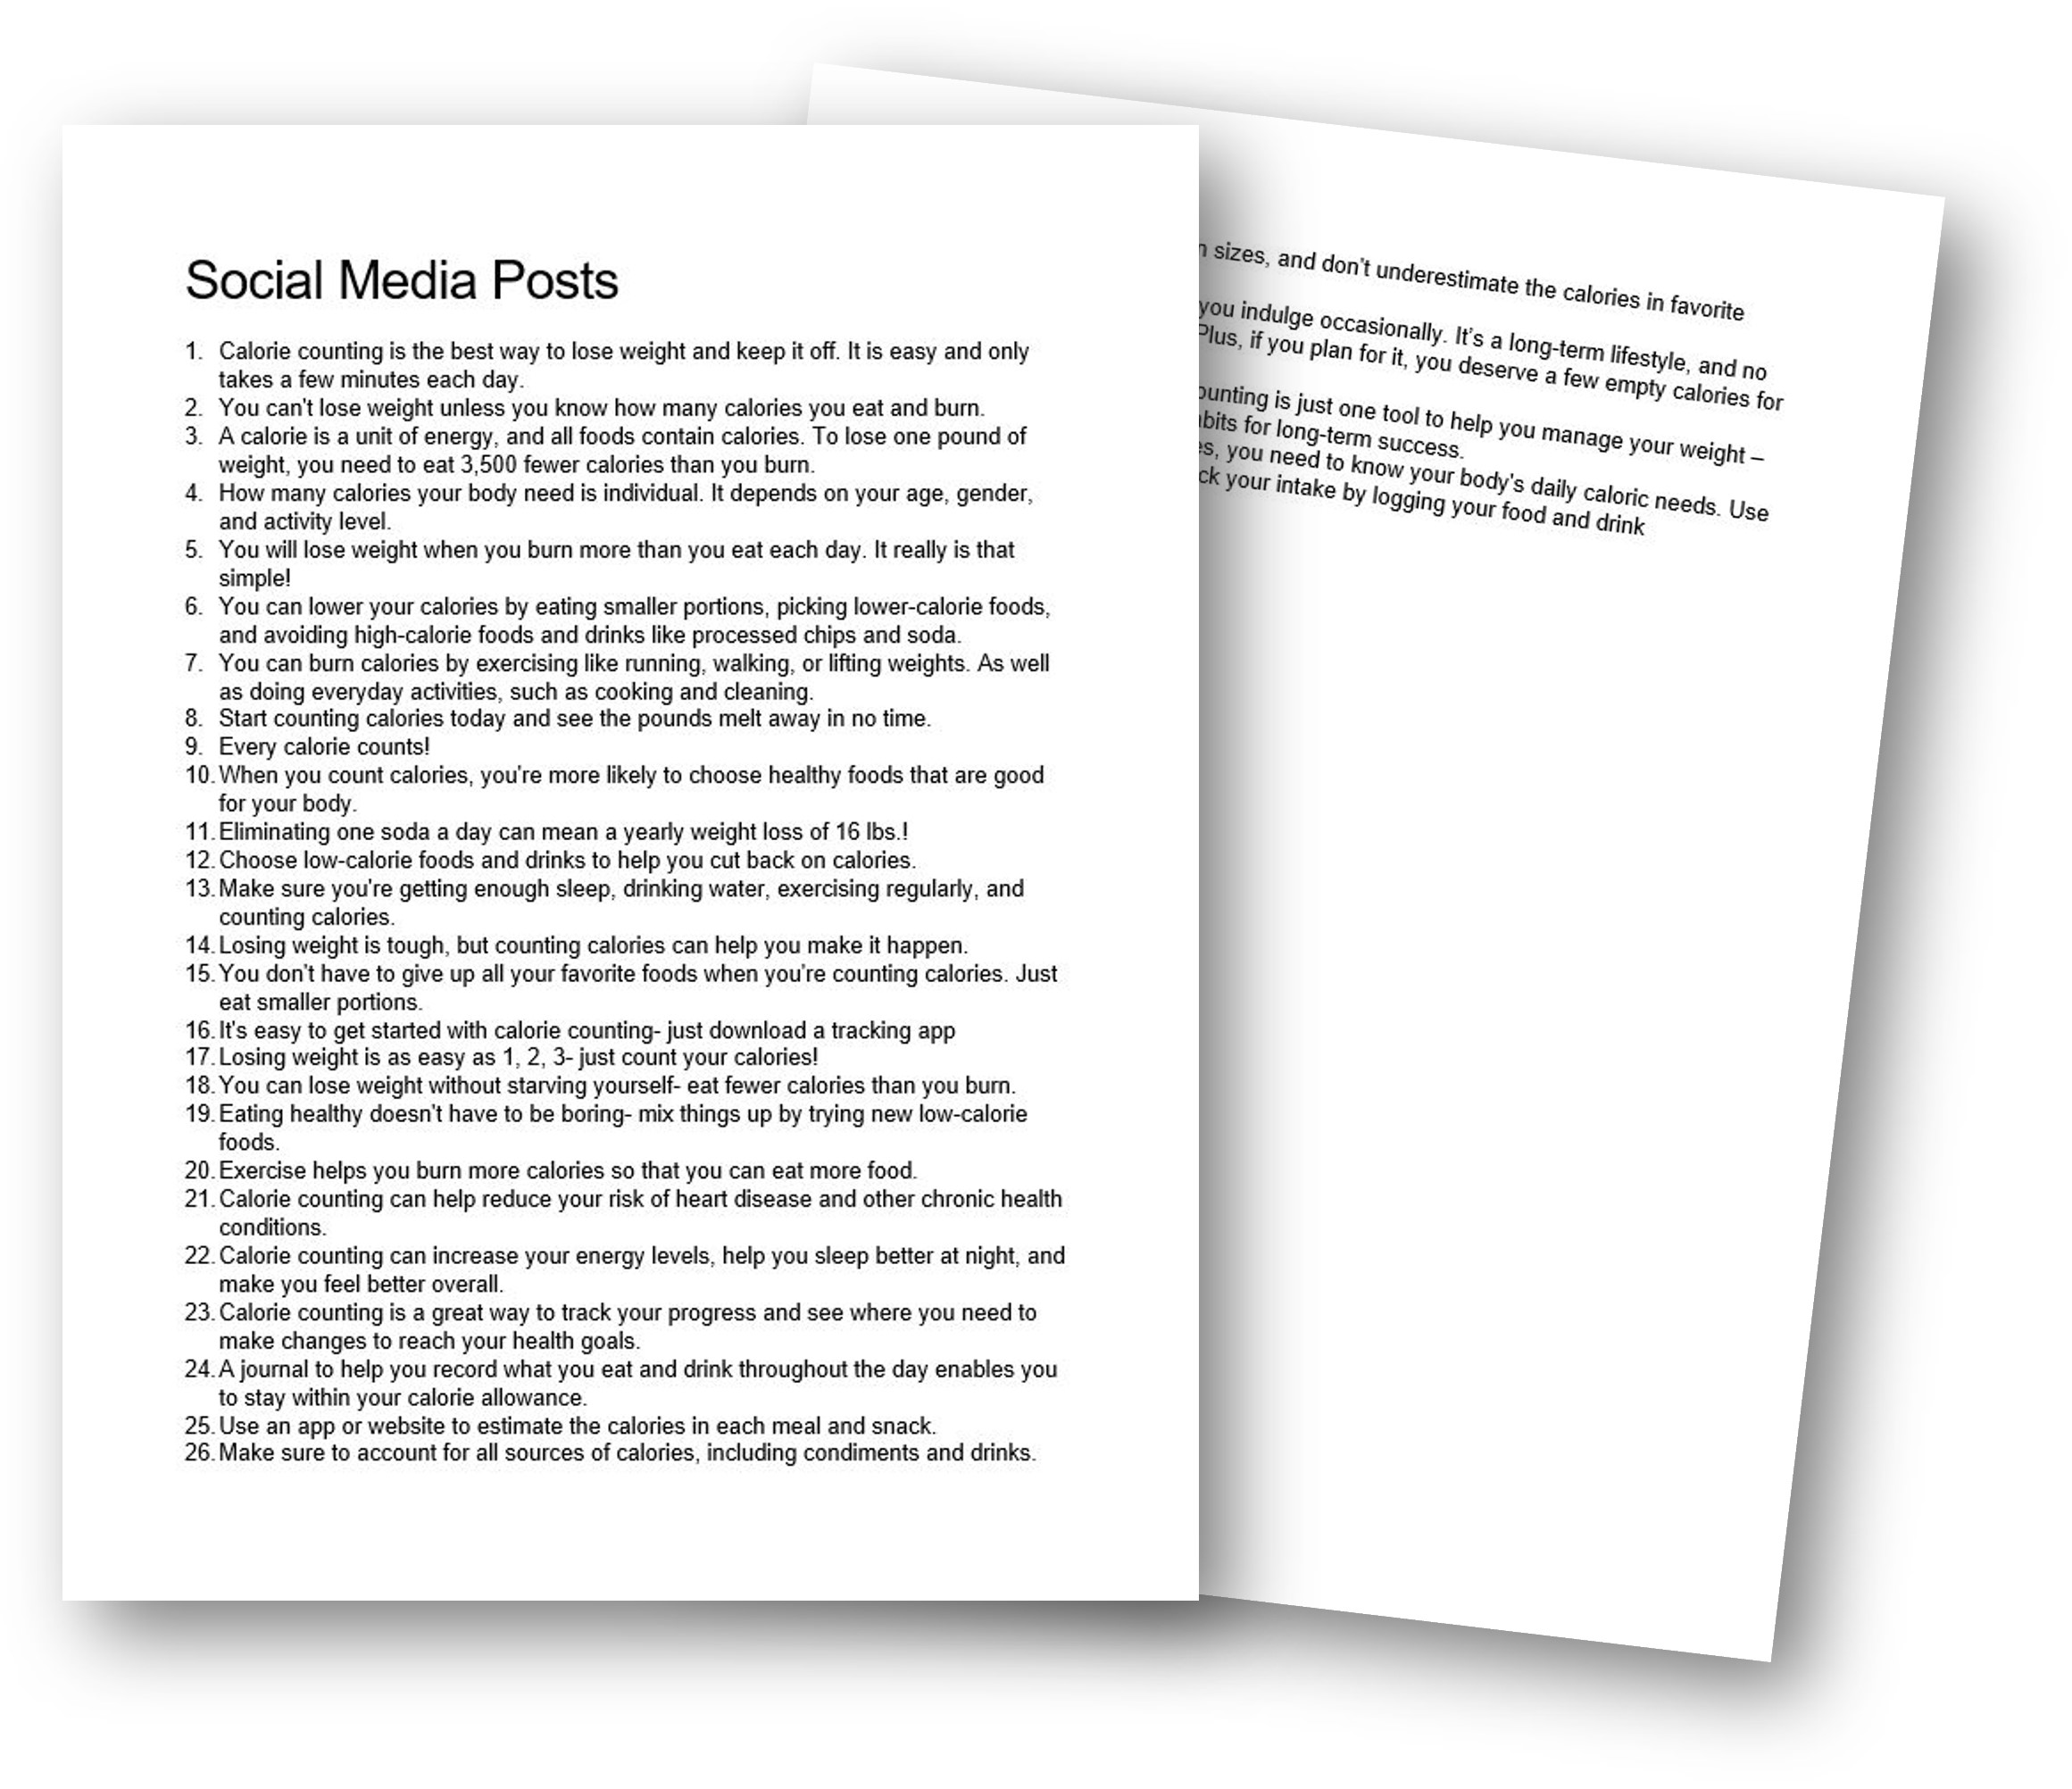 effective calorie counting social media posts plr